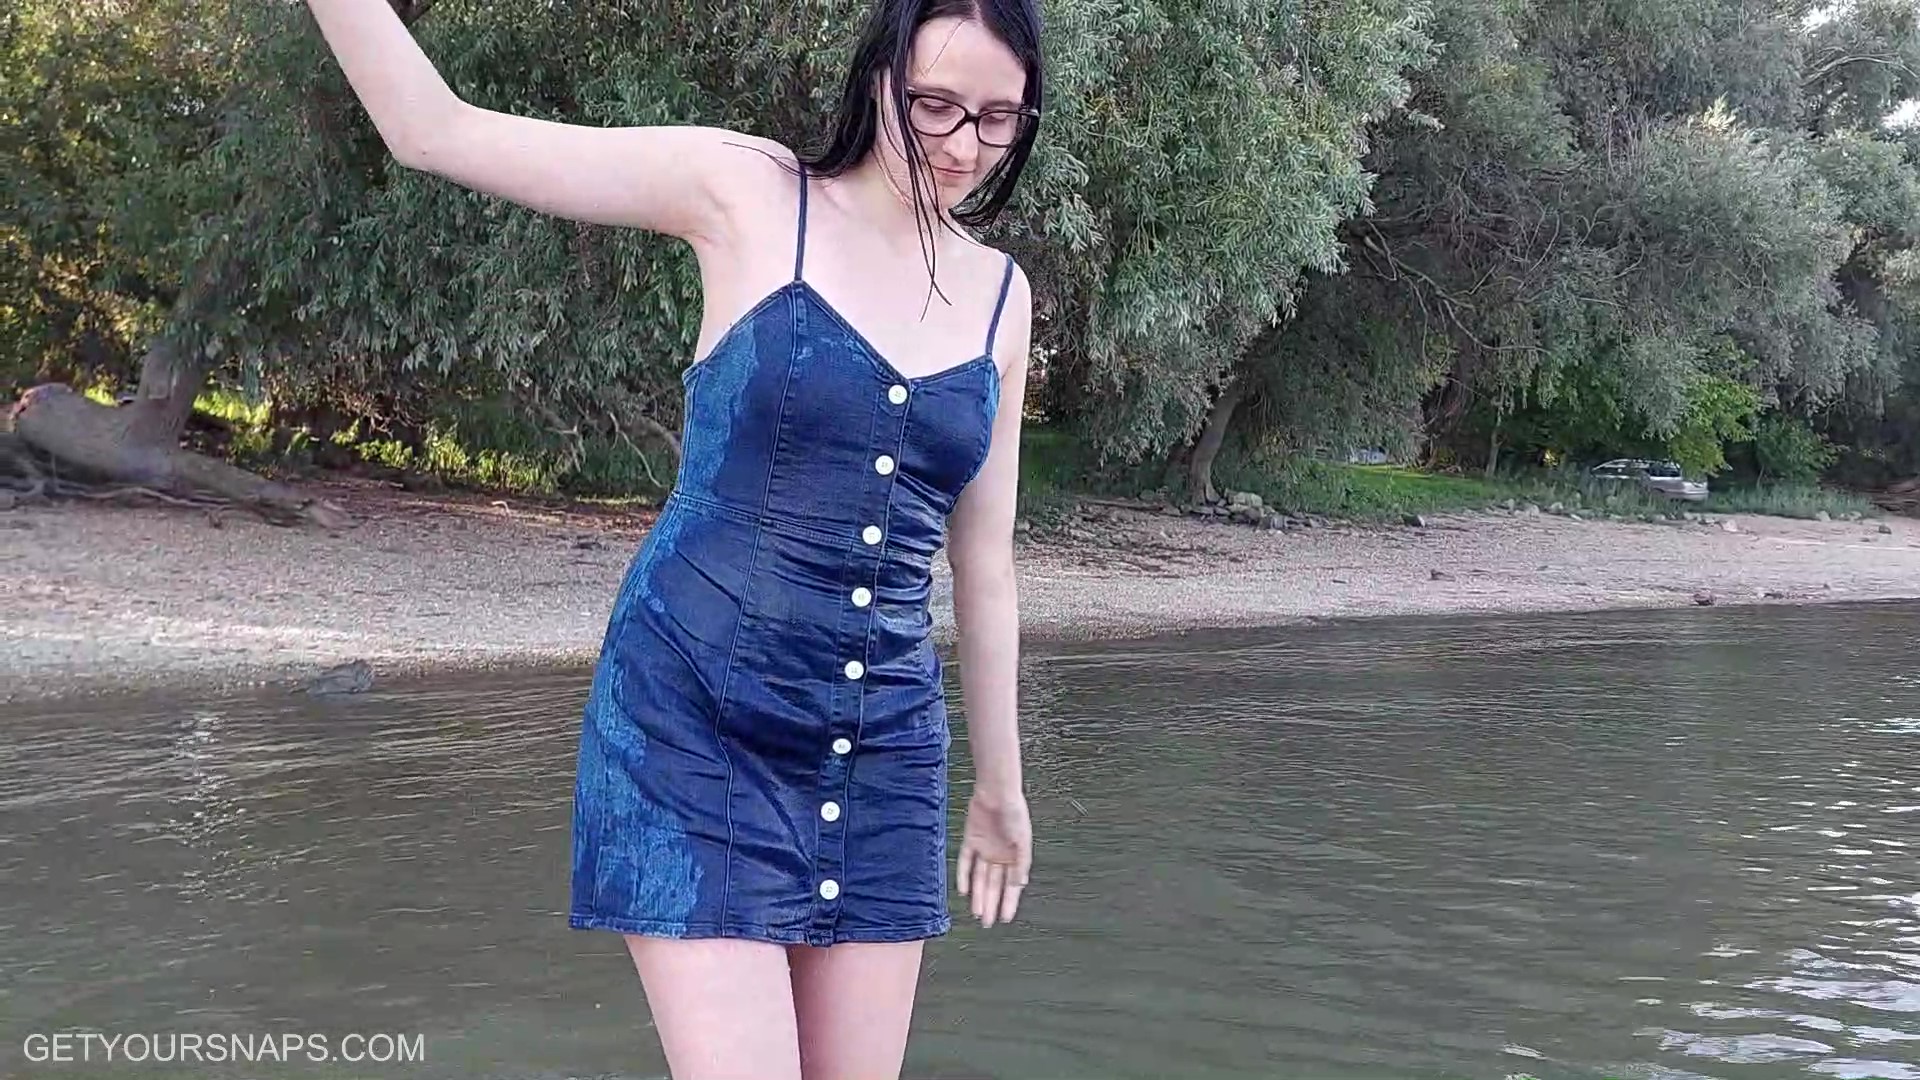 Emily gets wet in denim dress in the river - frame at 1m24s